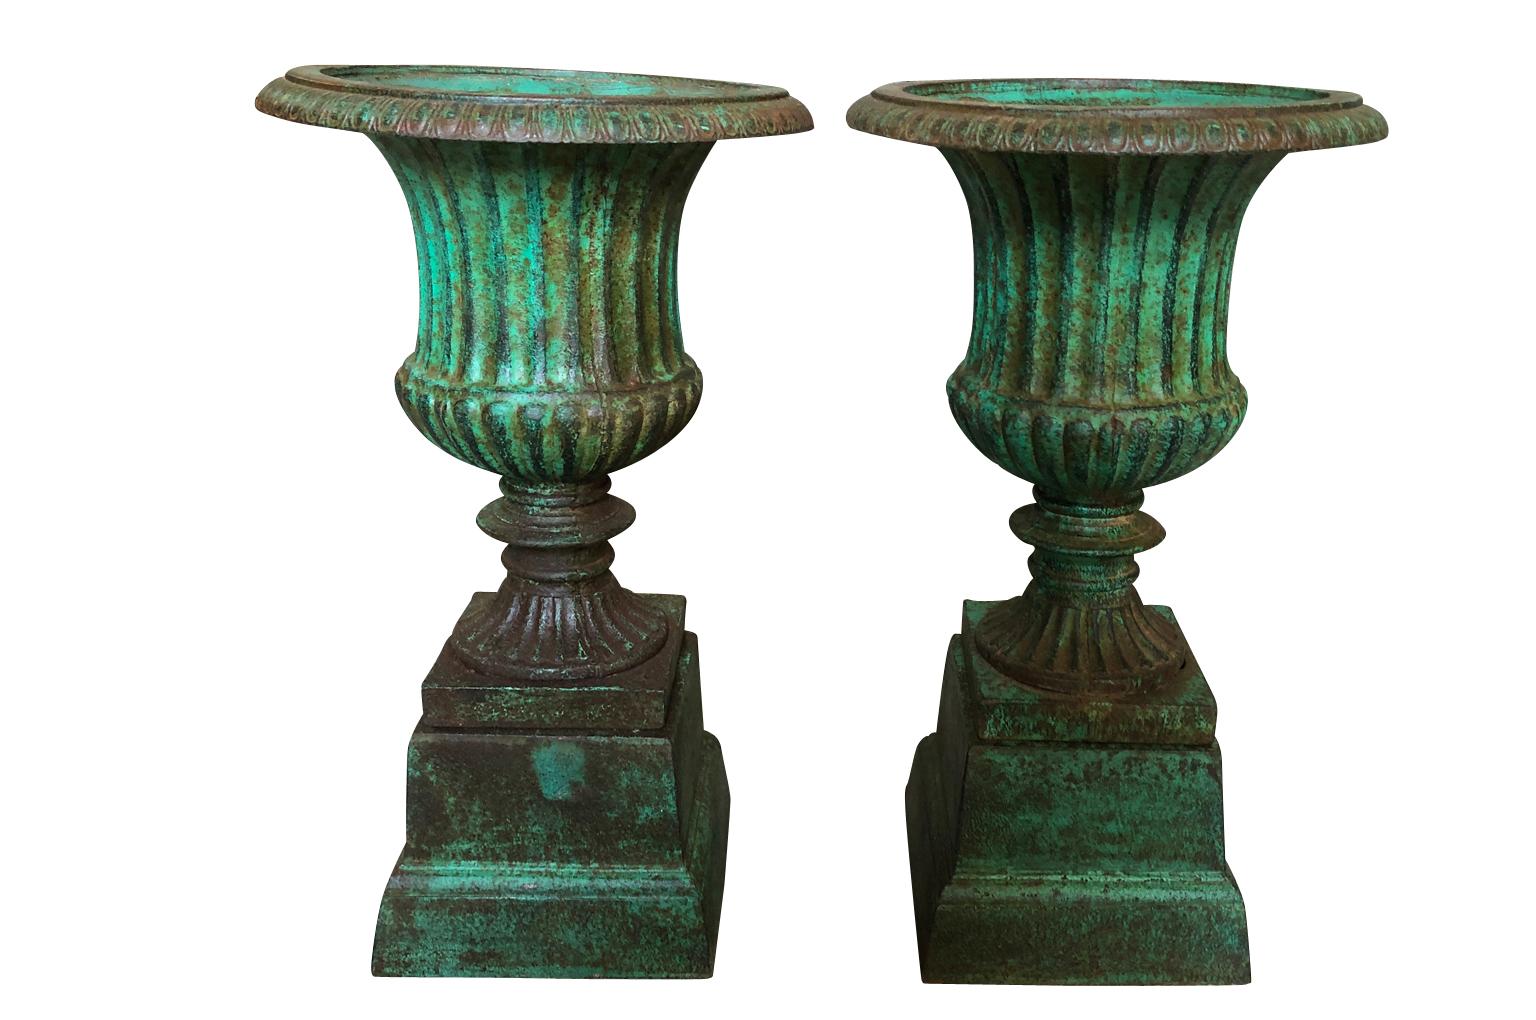 A wonderful pair of 19th century Medici style urns from Galicia, Spain. Wonderfully cast in iron with the wonderful painted finish. Perfect for any interior or garden.